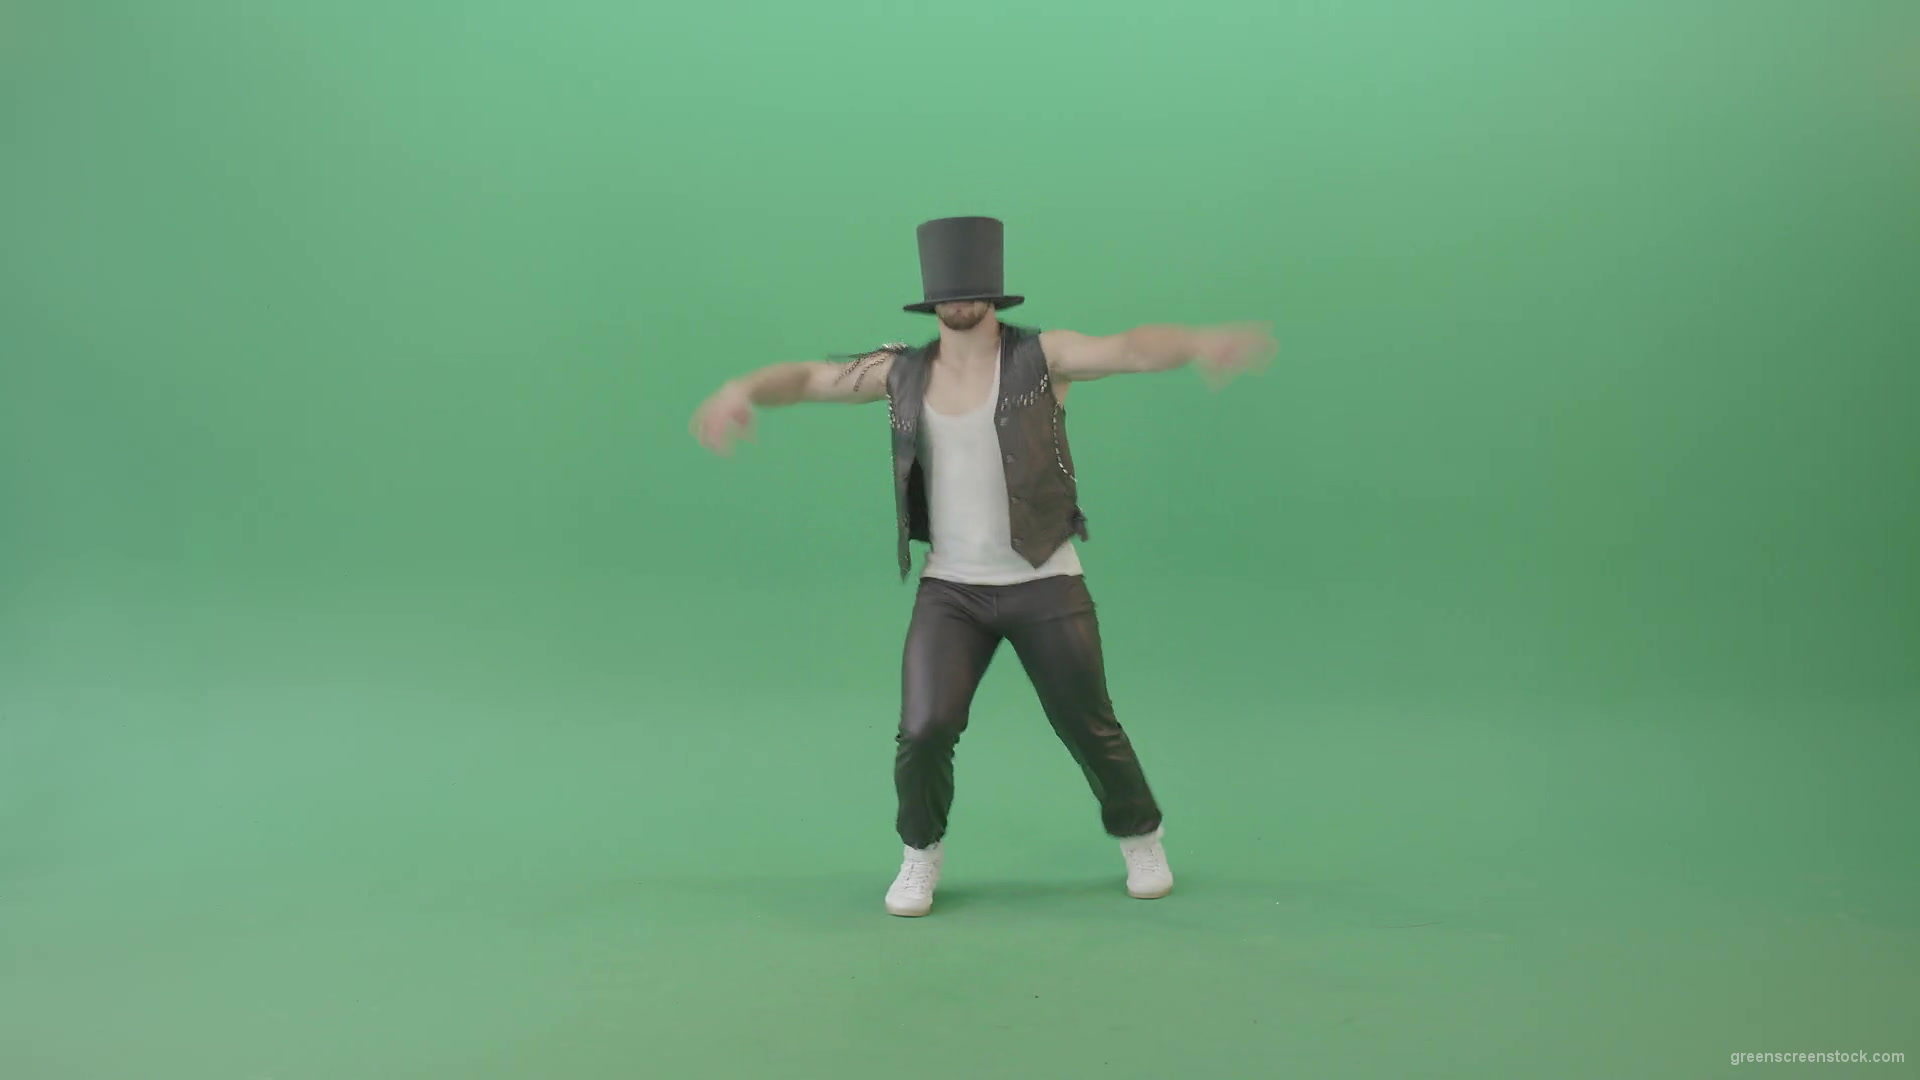 Funny-Man-in-Cylinder-Hat-and-black-fetish-costume-dancing-and-jumping-over-Green-Screen-4K-Video-Footage-1920_002 Green Screen Stock